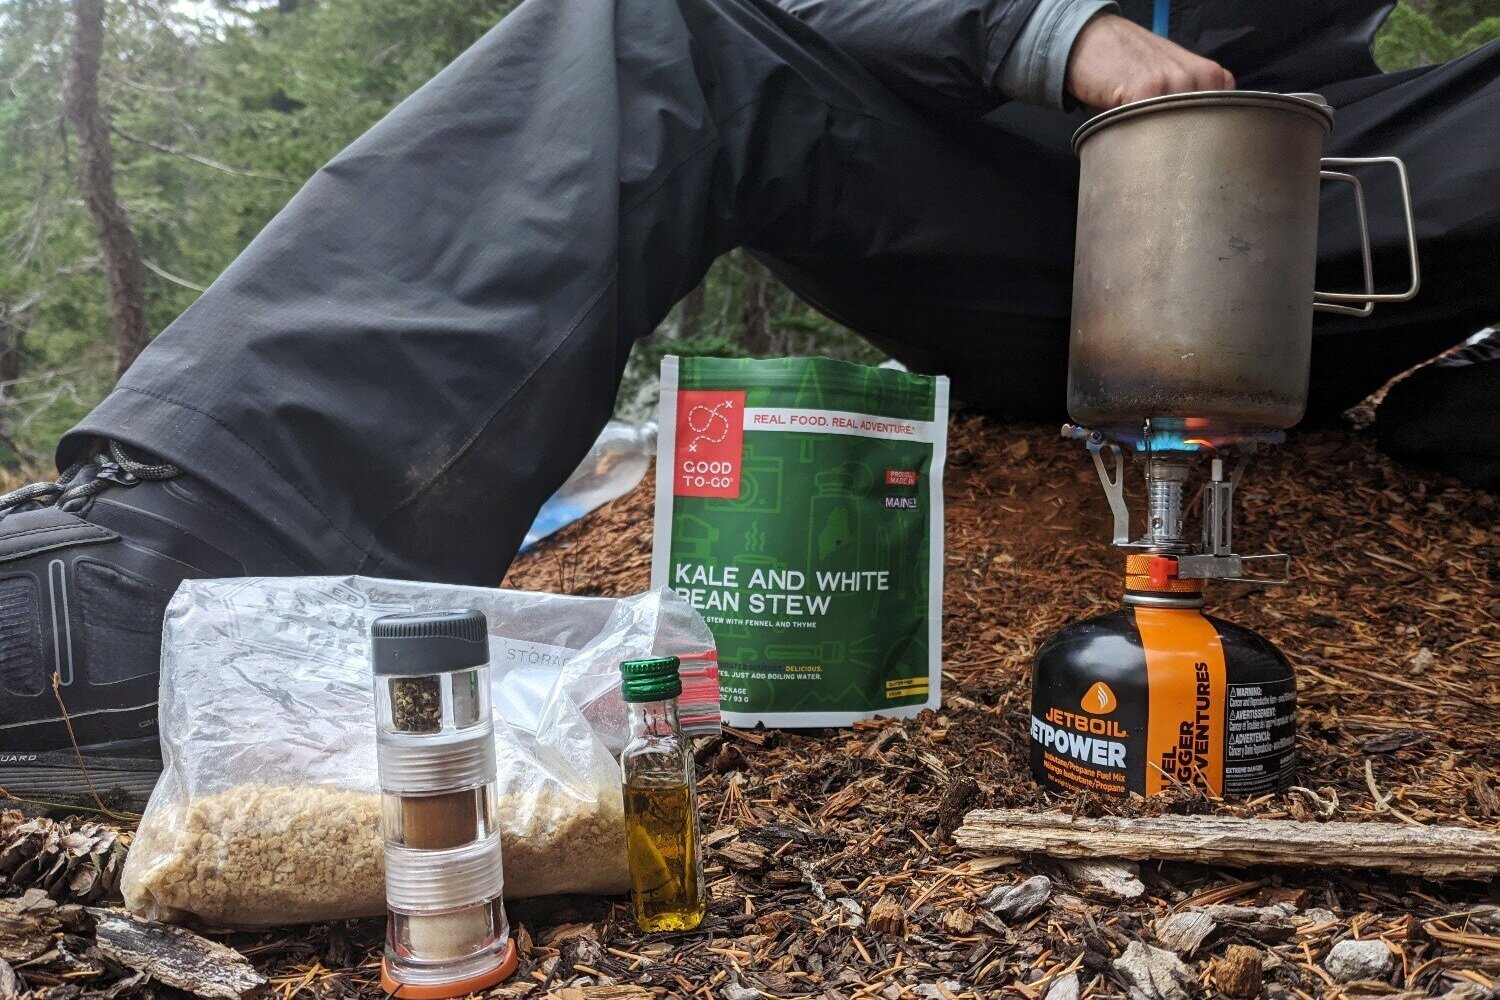 Bring some olive oil and a small amount of your favorite spices to add some pizzazz to your backcountry meals.